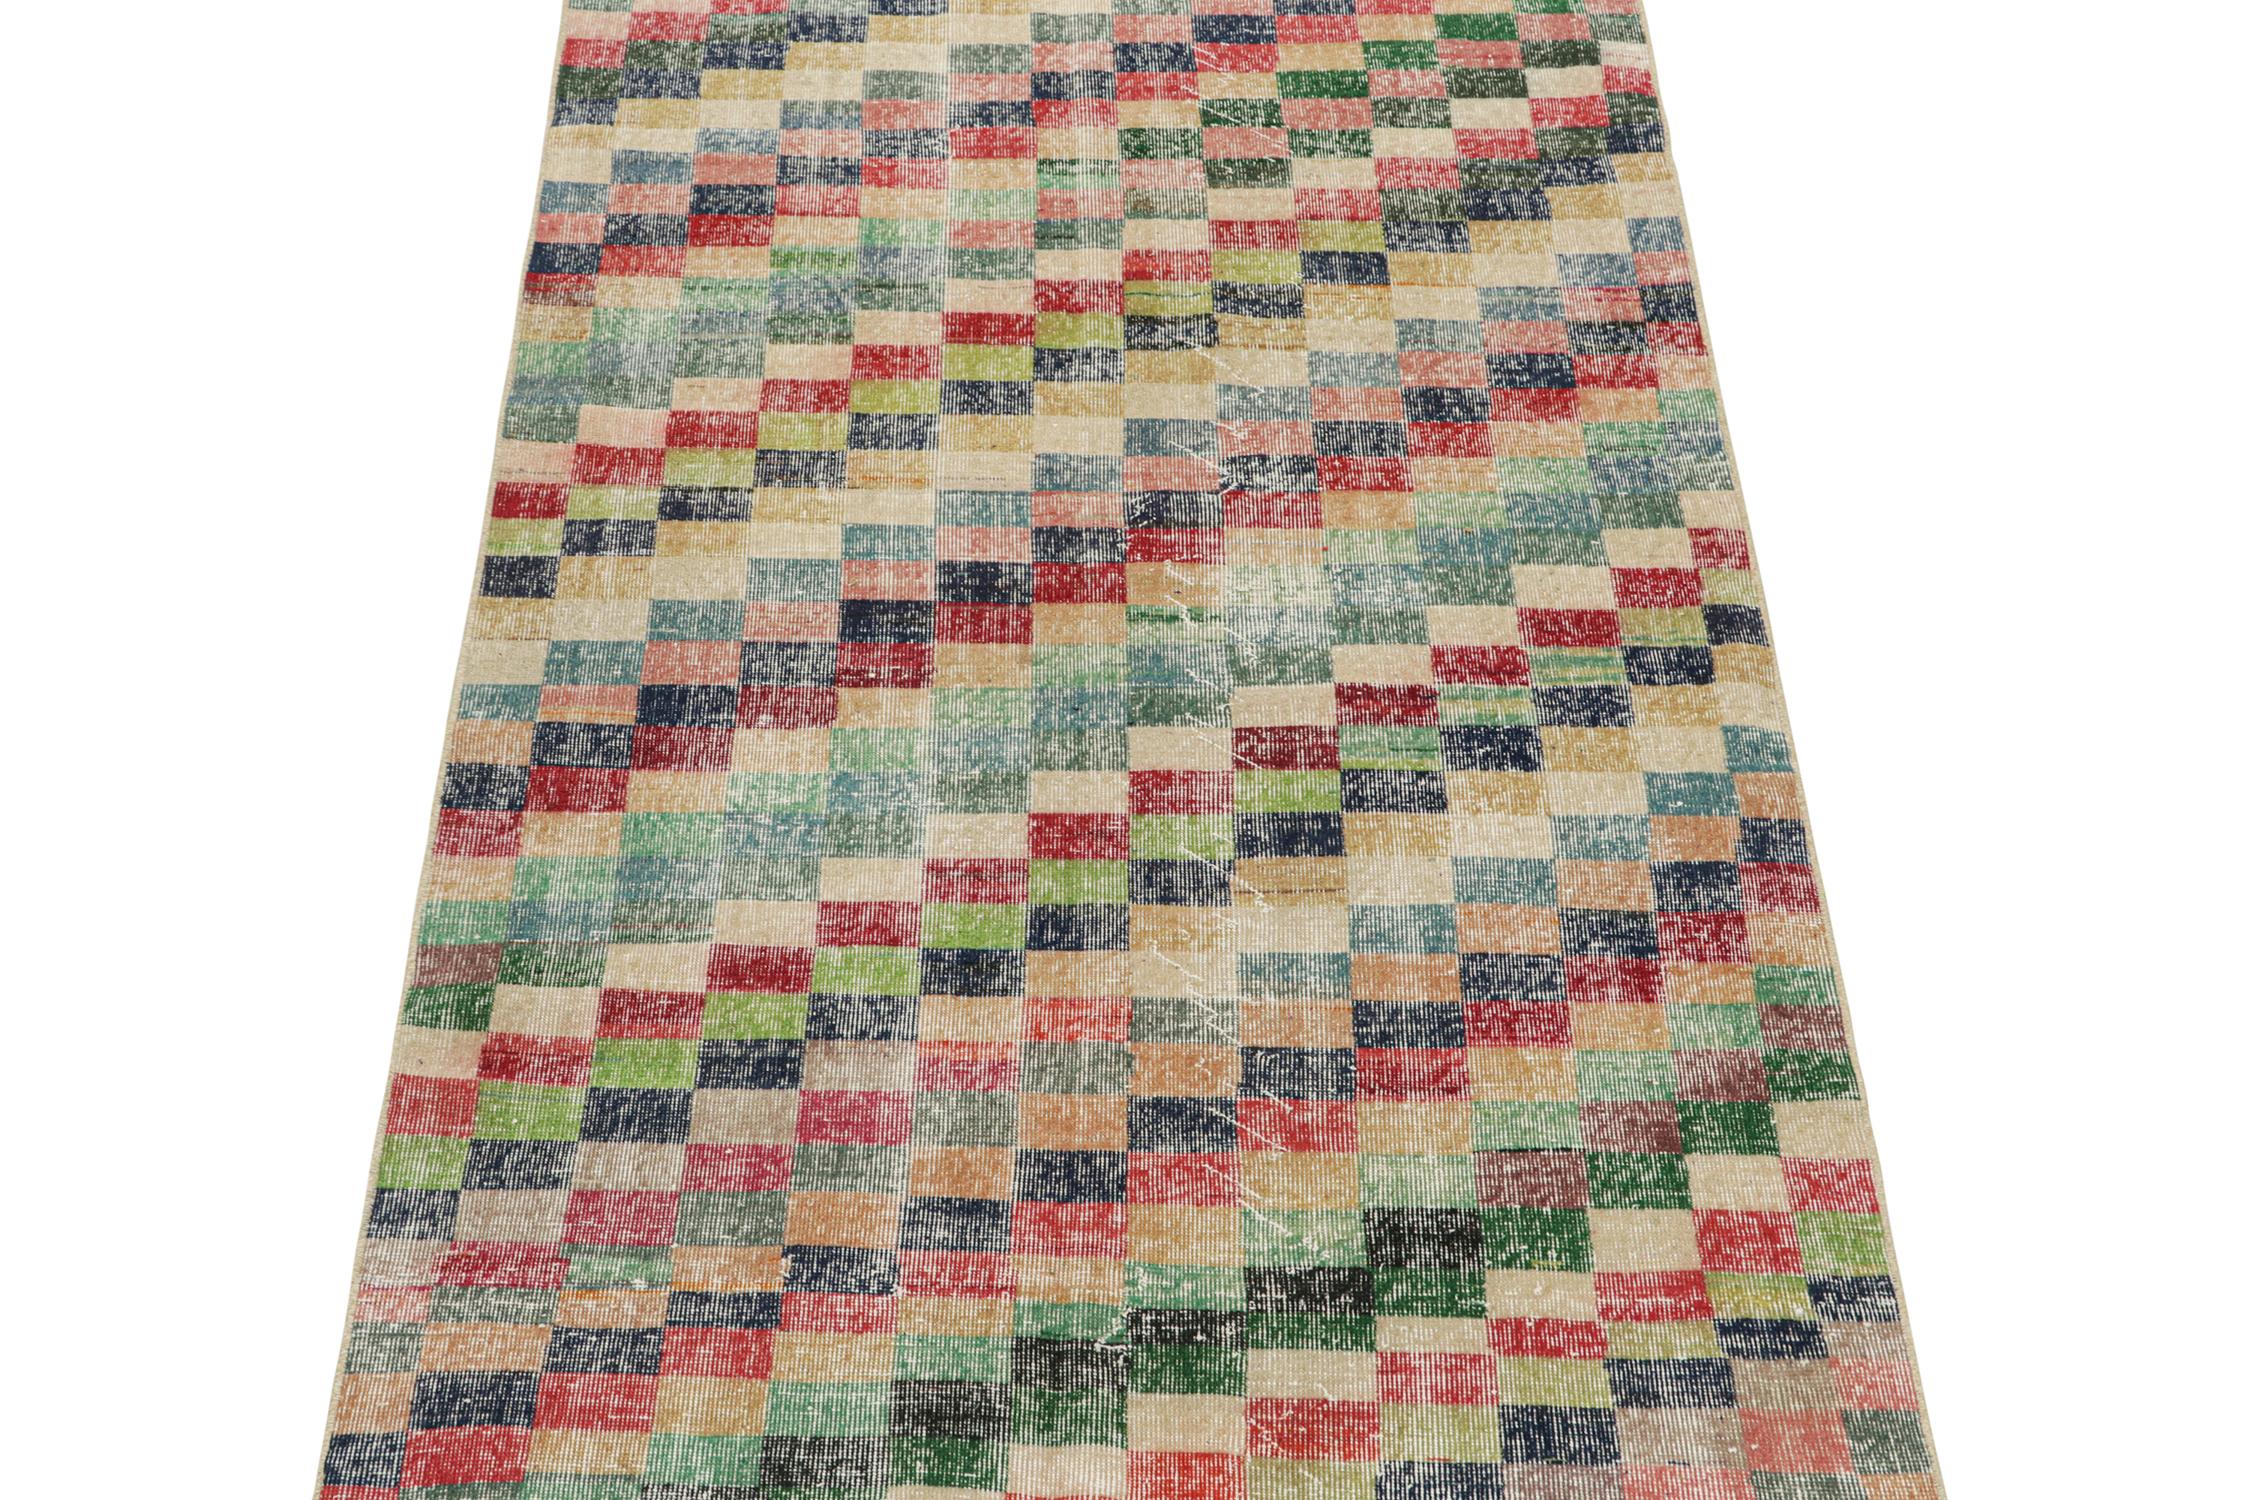 This vintage 5x8 distressed style rug is a new addition to Rug & Kilim’s Mid-Century Pasha Collection. This line is a commemoration, with rare curations we believe to hail from multidisciplinary Turkish designer Zeki Müren. 

Further on the